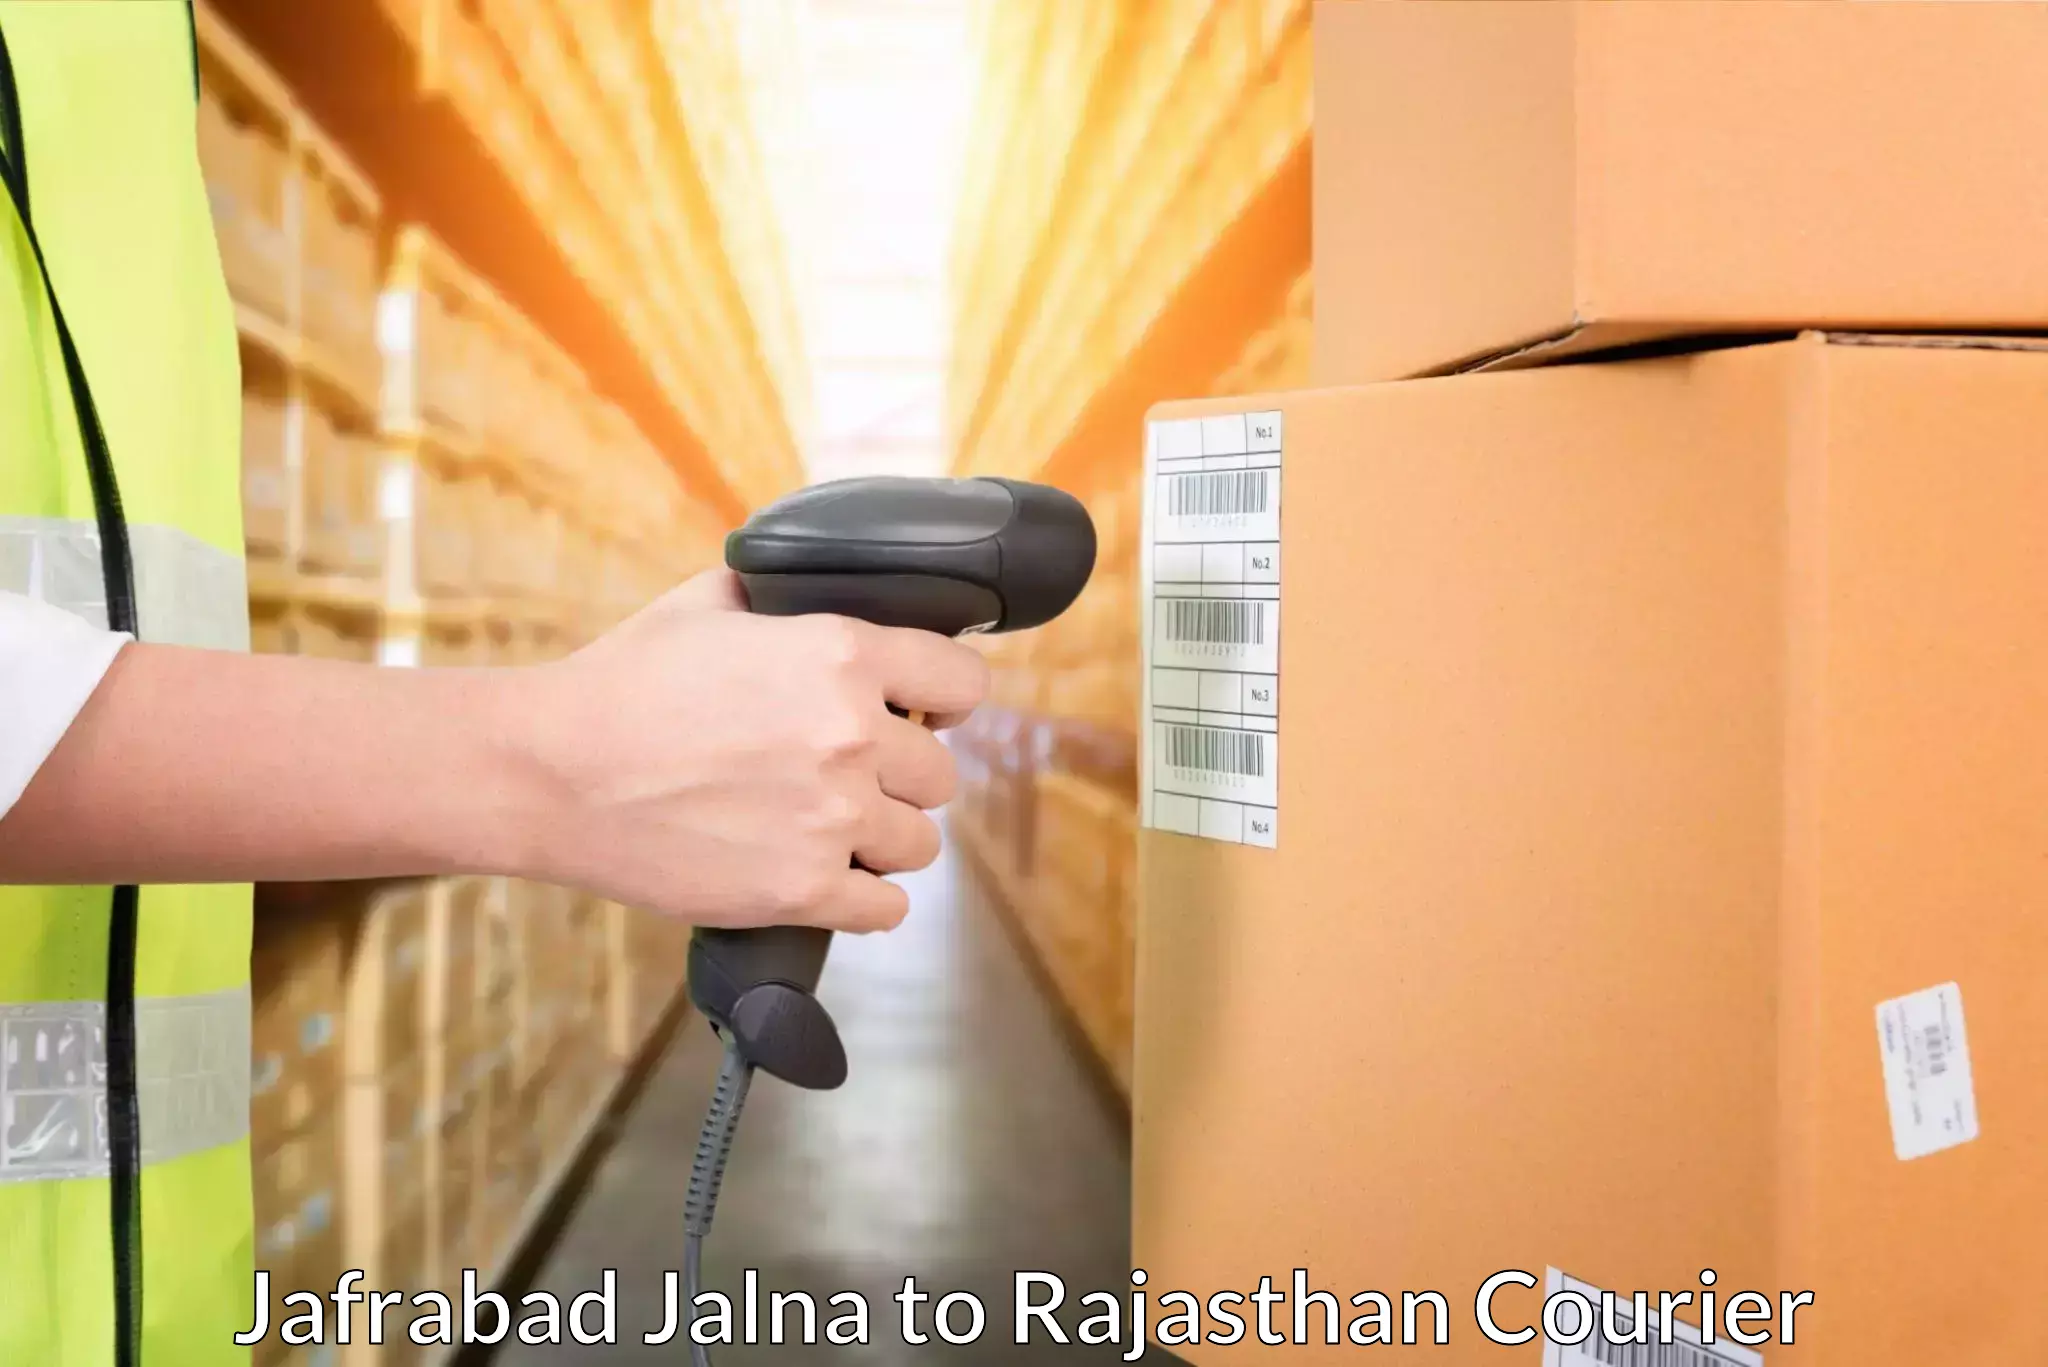 24-hour courier service Jafrabad Jalna to Mathania